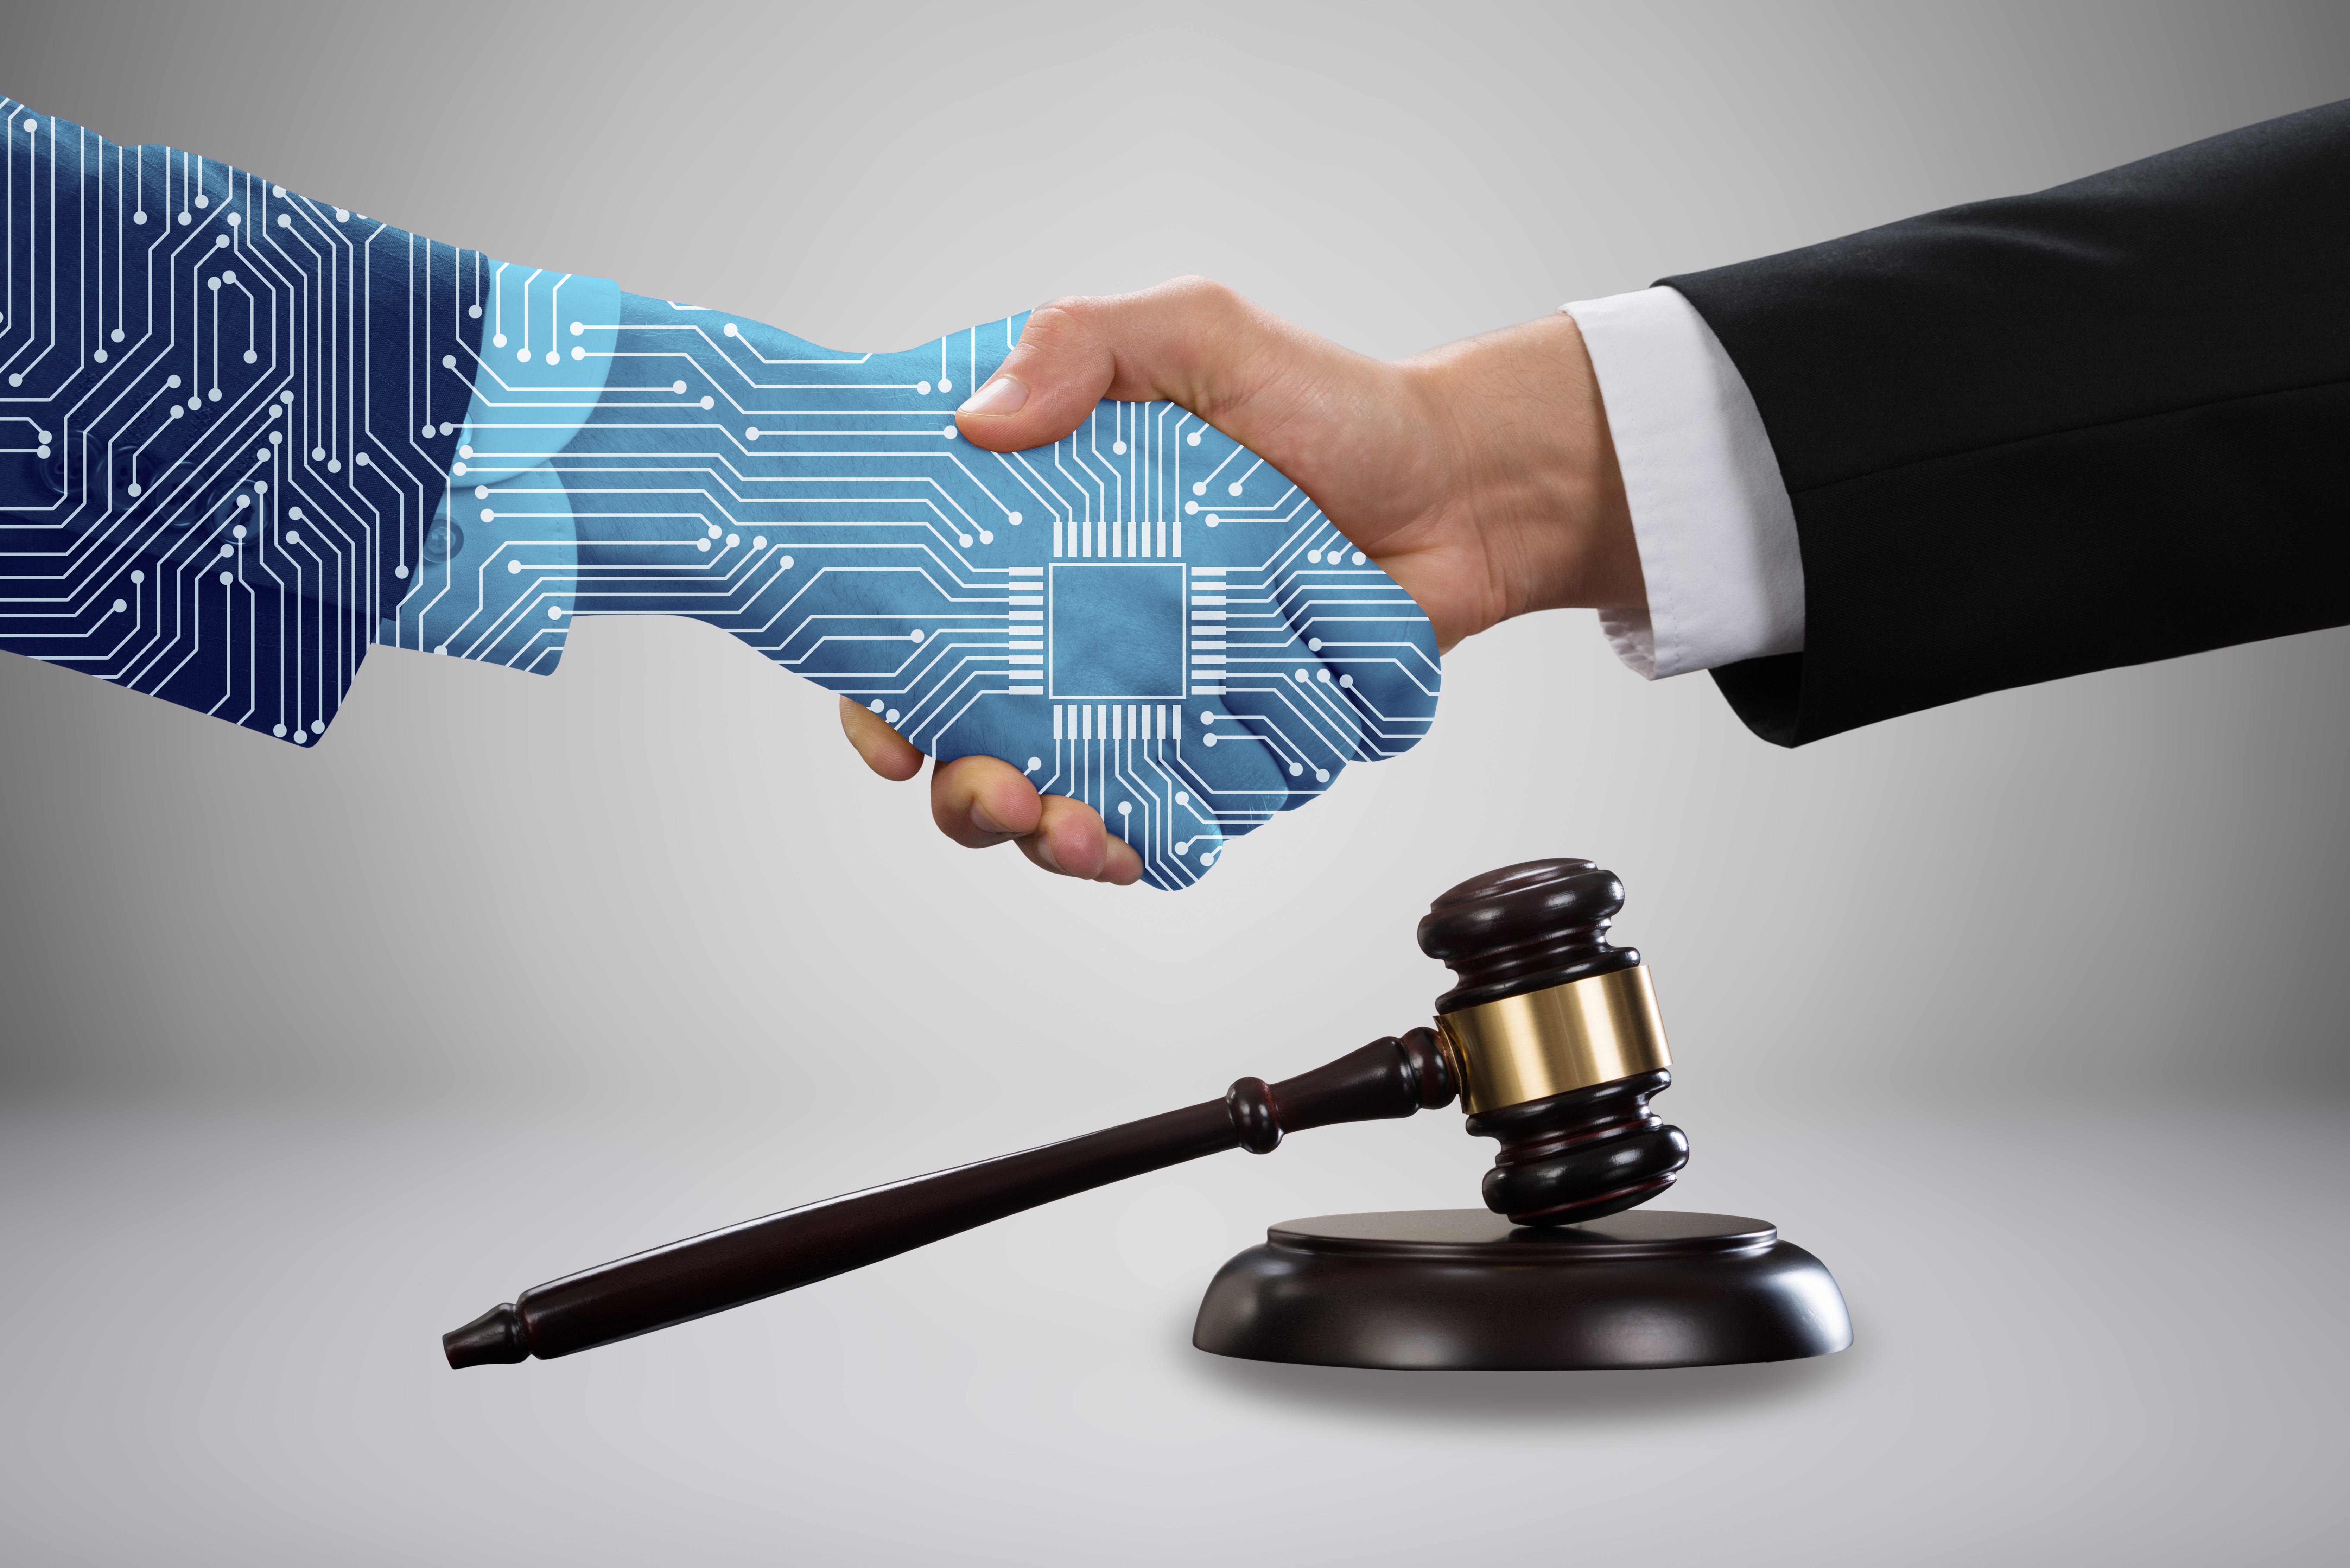 Gavel and mallet in front of lawyer shaking hands with AI partner.